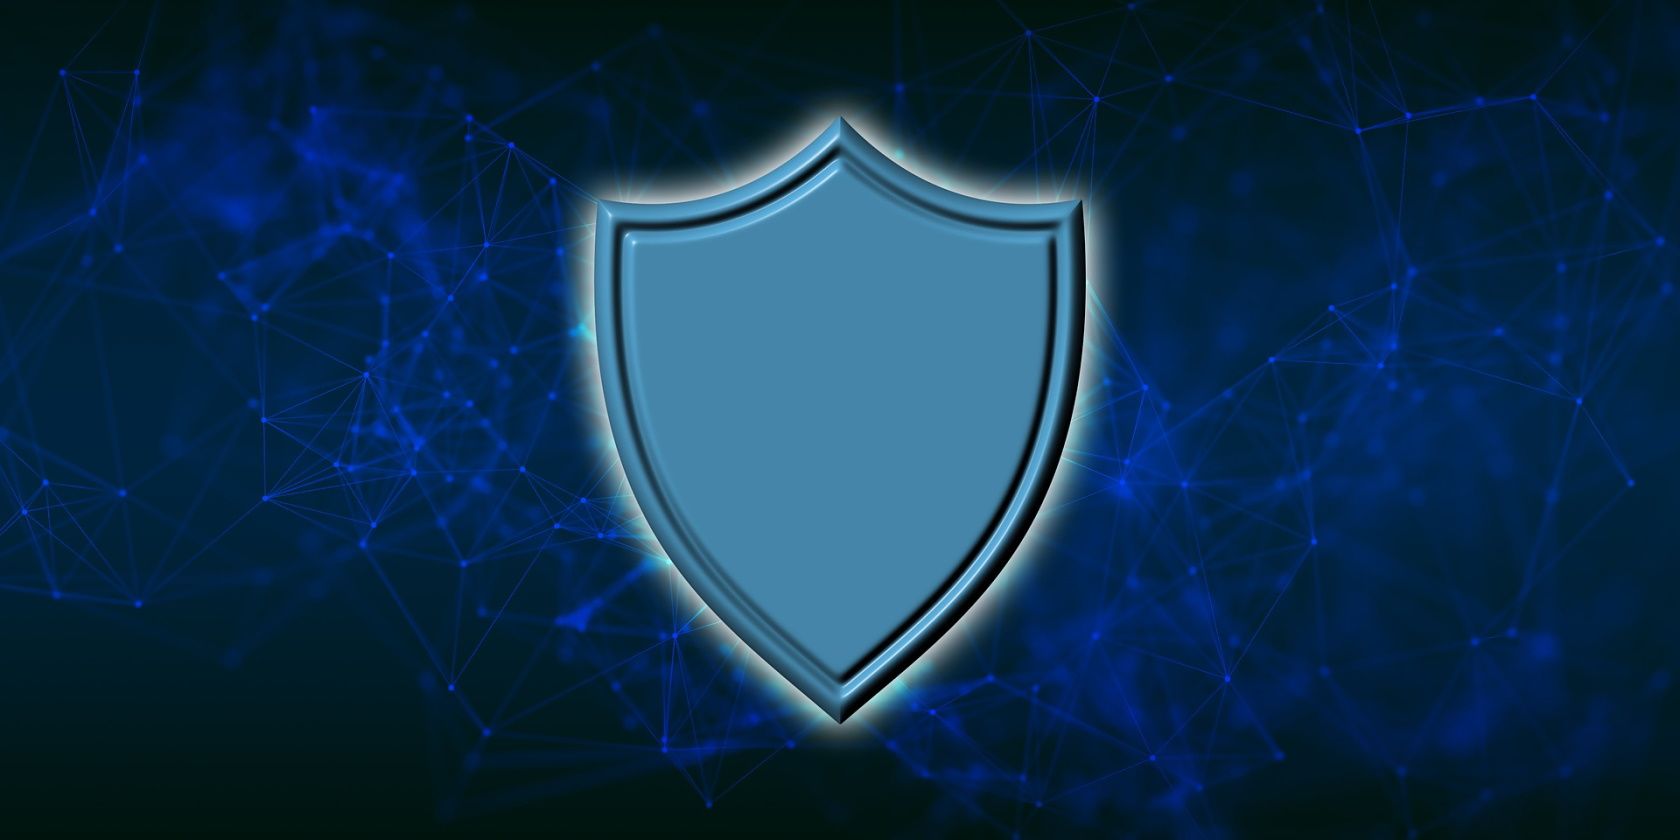 Image of Shield Representing Cybersecurity 